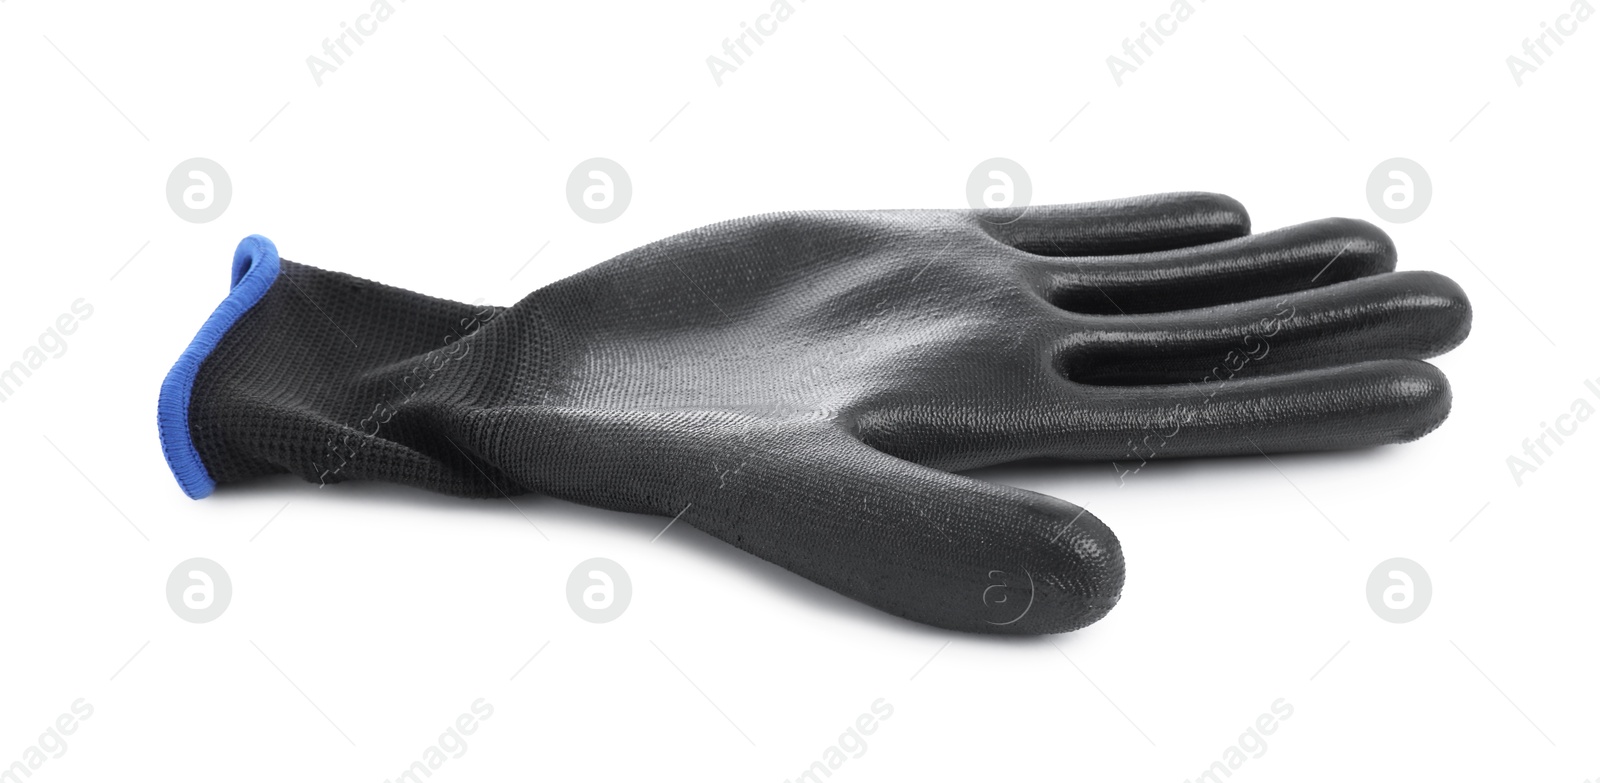 Photo of Protective glove isolated on white. Safety equipment